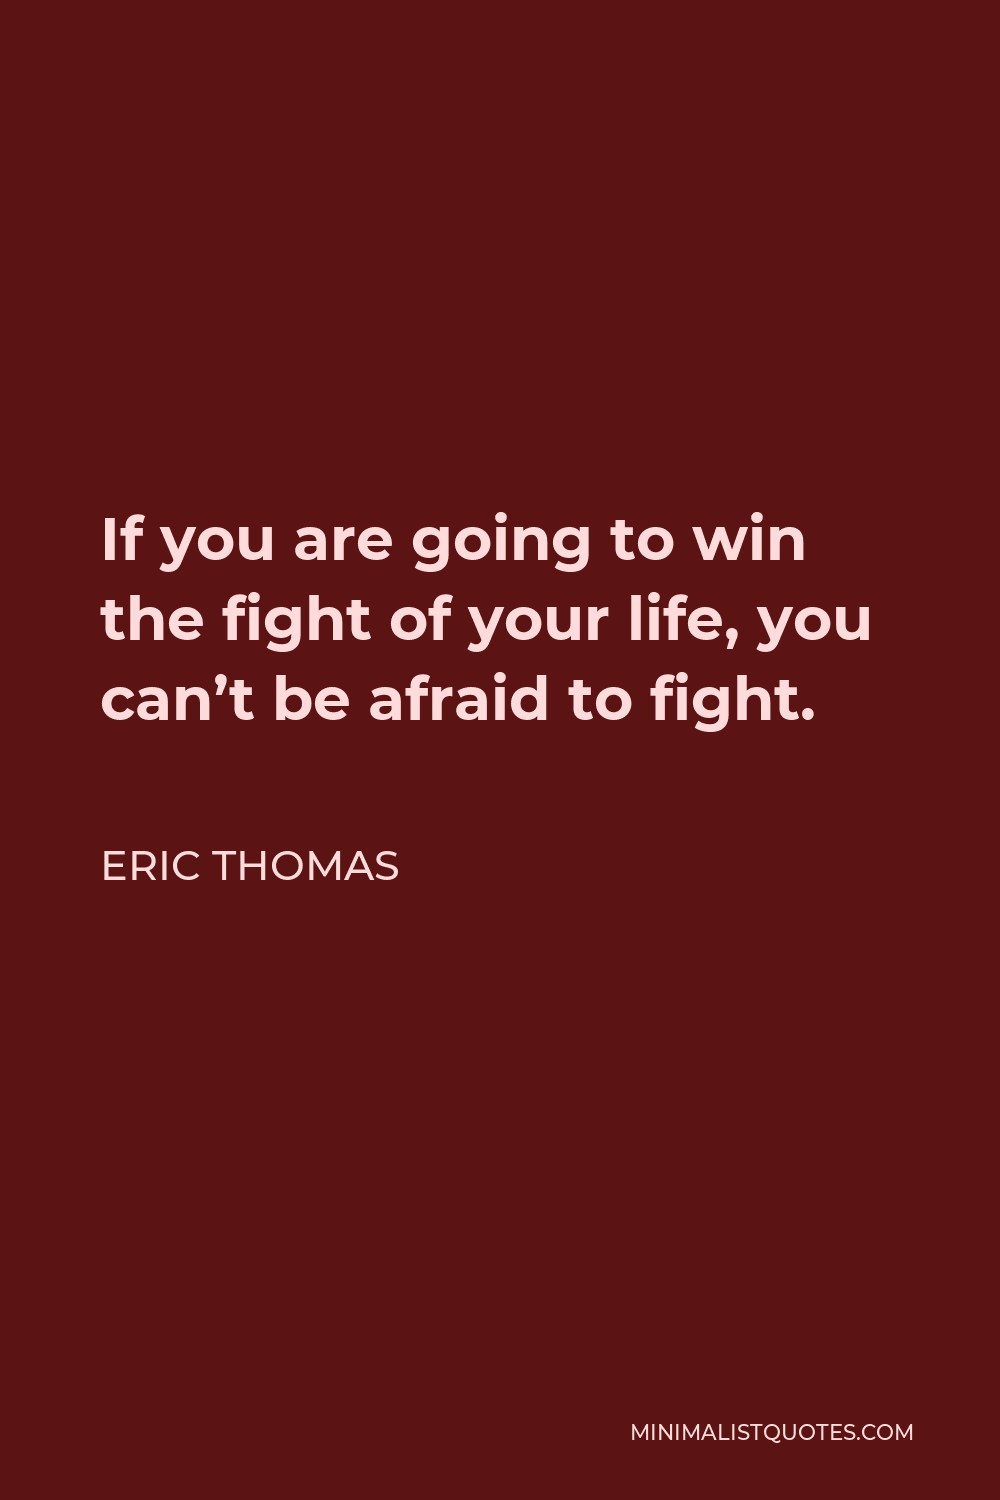 Eric Thomas Quote - If you are going to win the fight of your life, you can’t be afraid to fight.